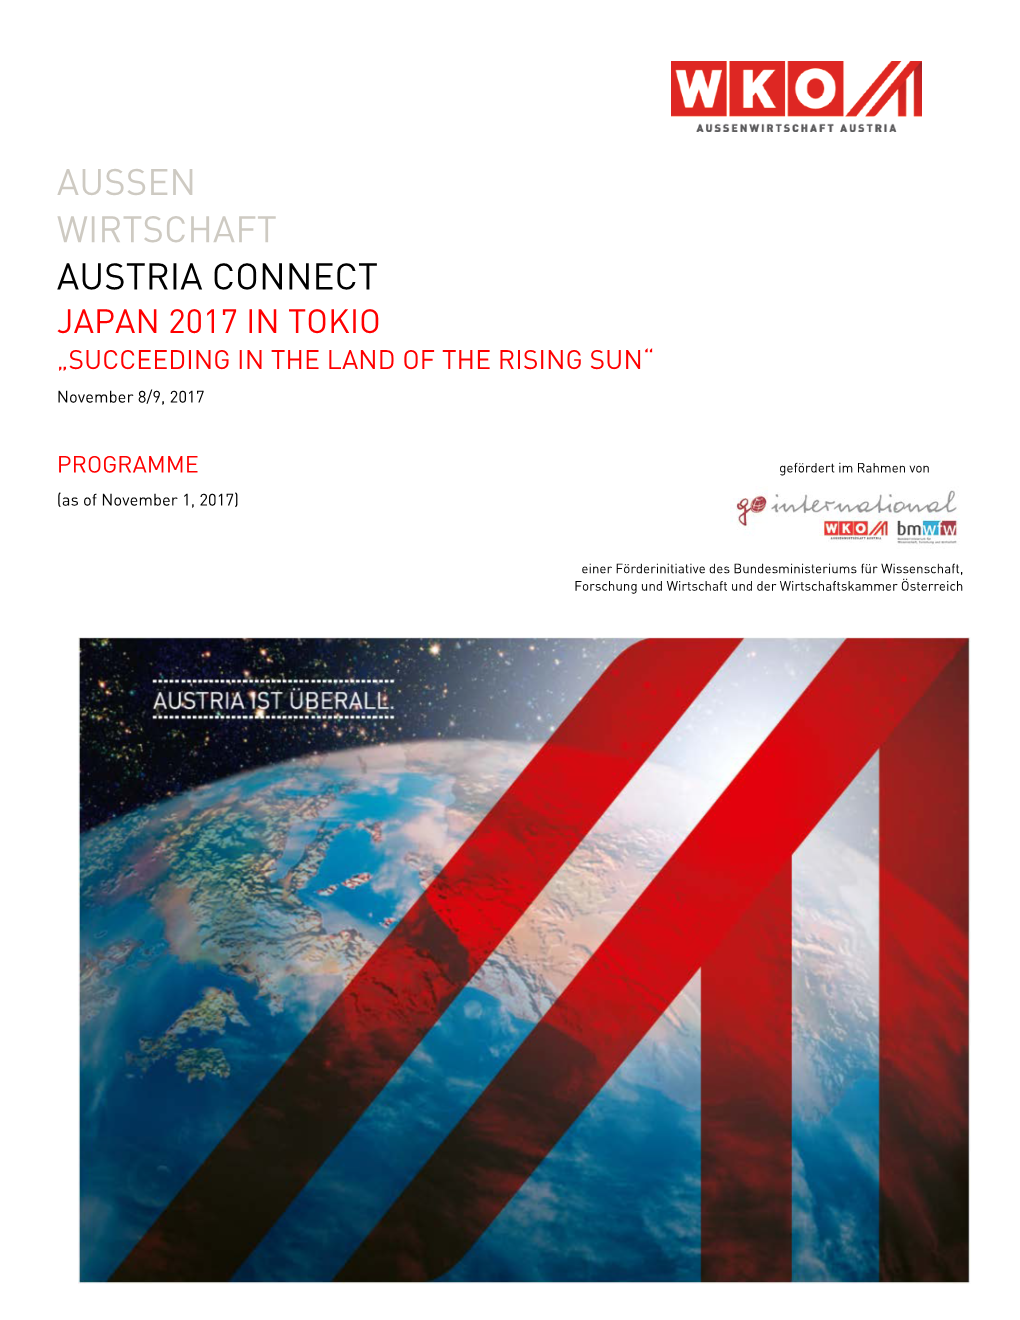 AUSTRIA CONNECT JAPAN 2017 in TOKIO „SUCCEEDING in the LAND of the RISING SUN“ November 8/9, 2017